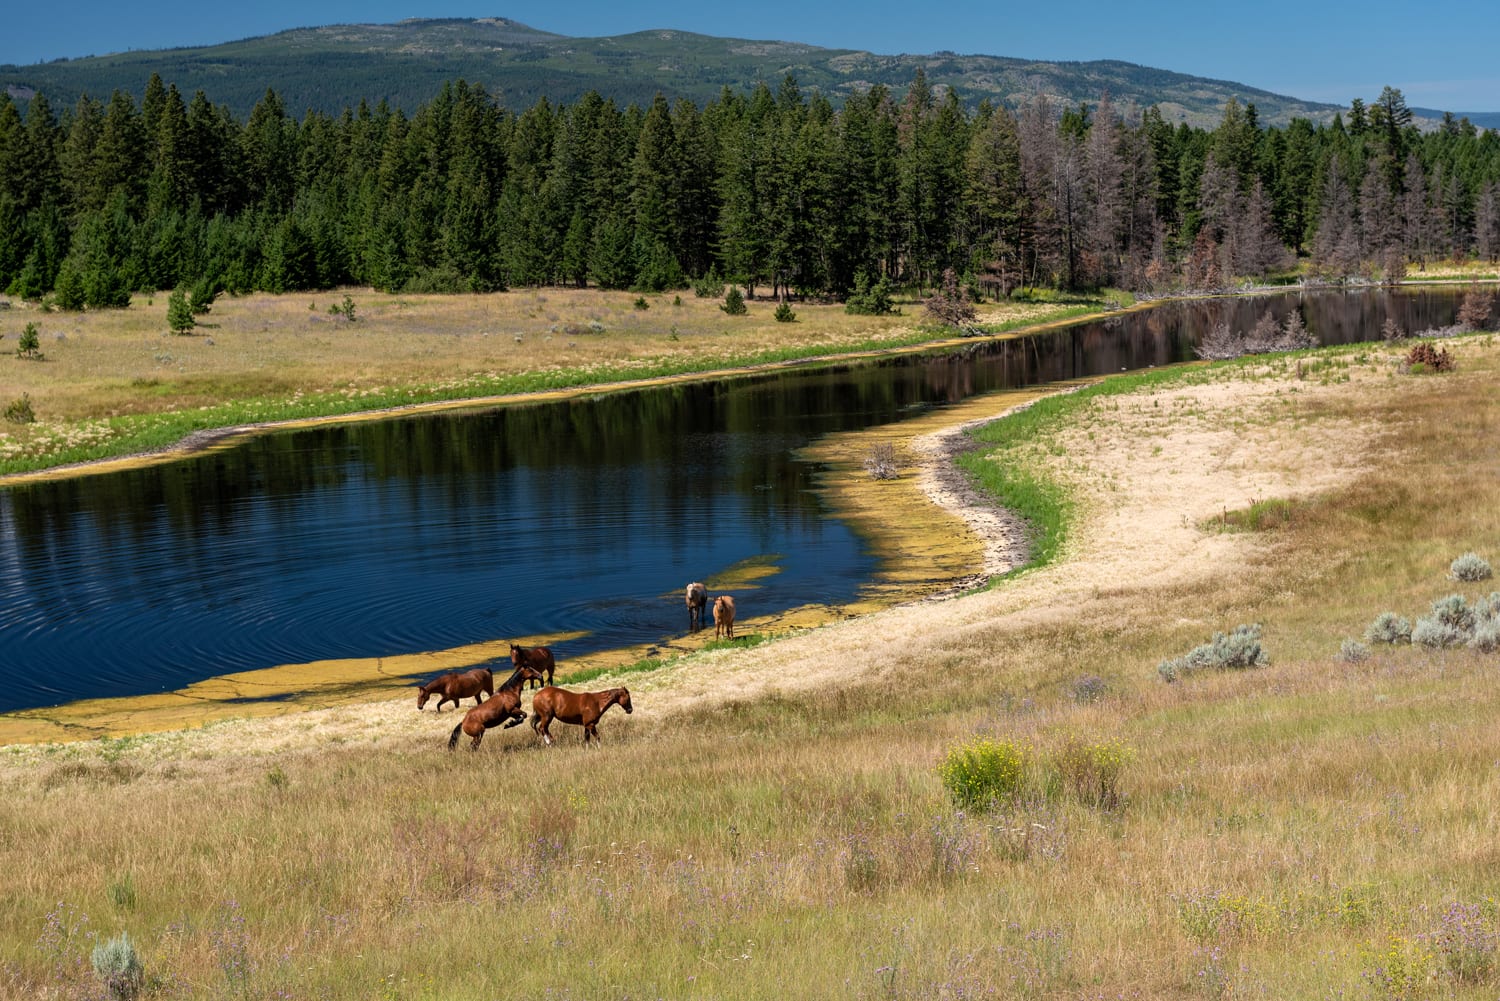 Kamloops rural life fields with river and tall trees with horses